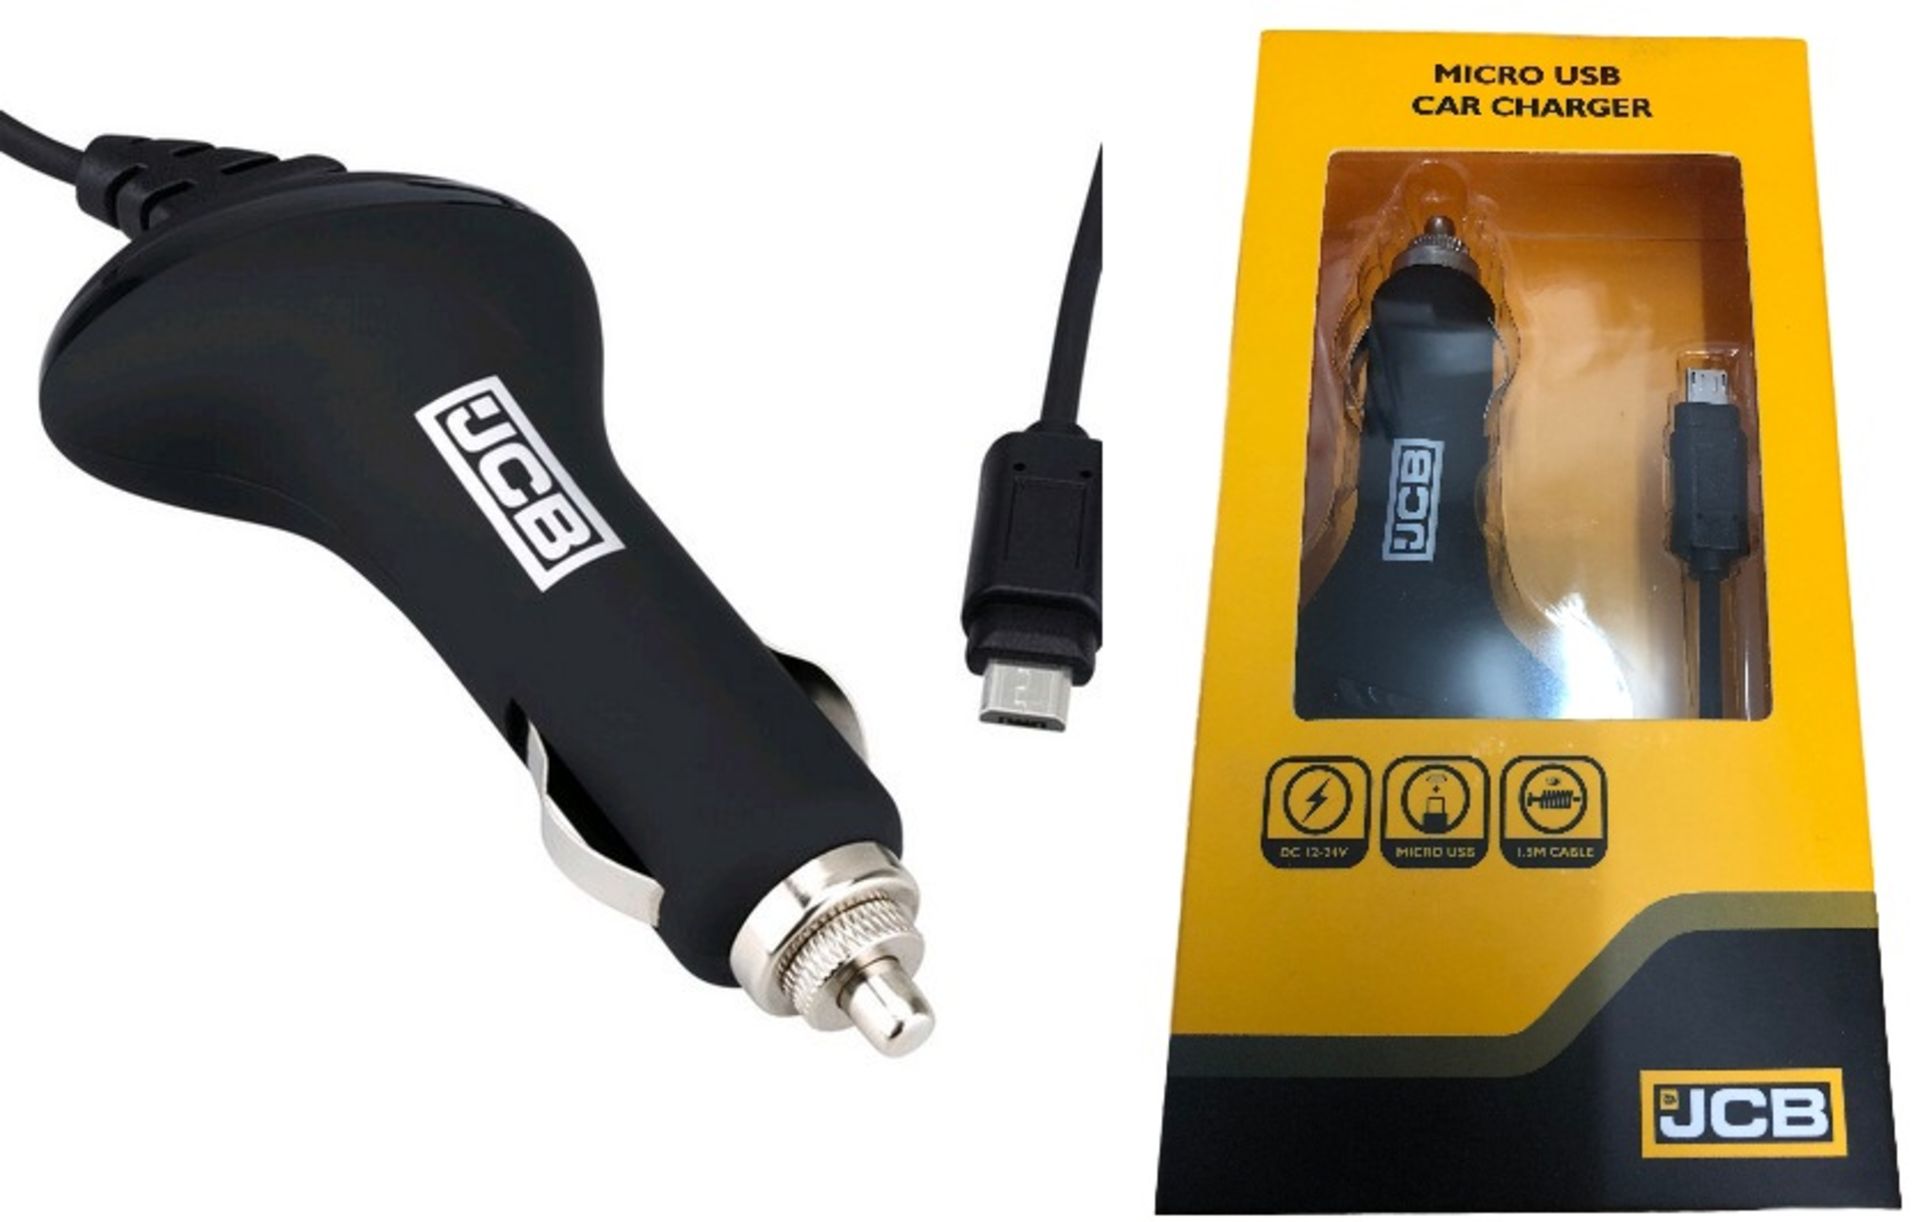 V Brand New JCB 12V Micro USB Car Charger - DC 12-24V - Micro USB Connector - 1.5M Coiled Cable -